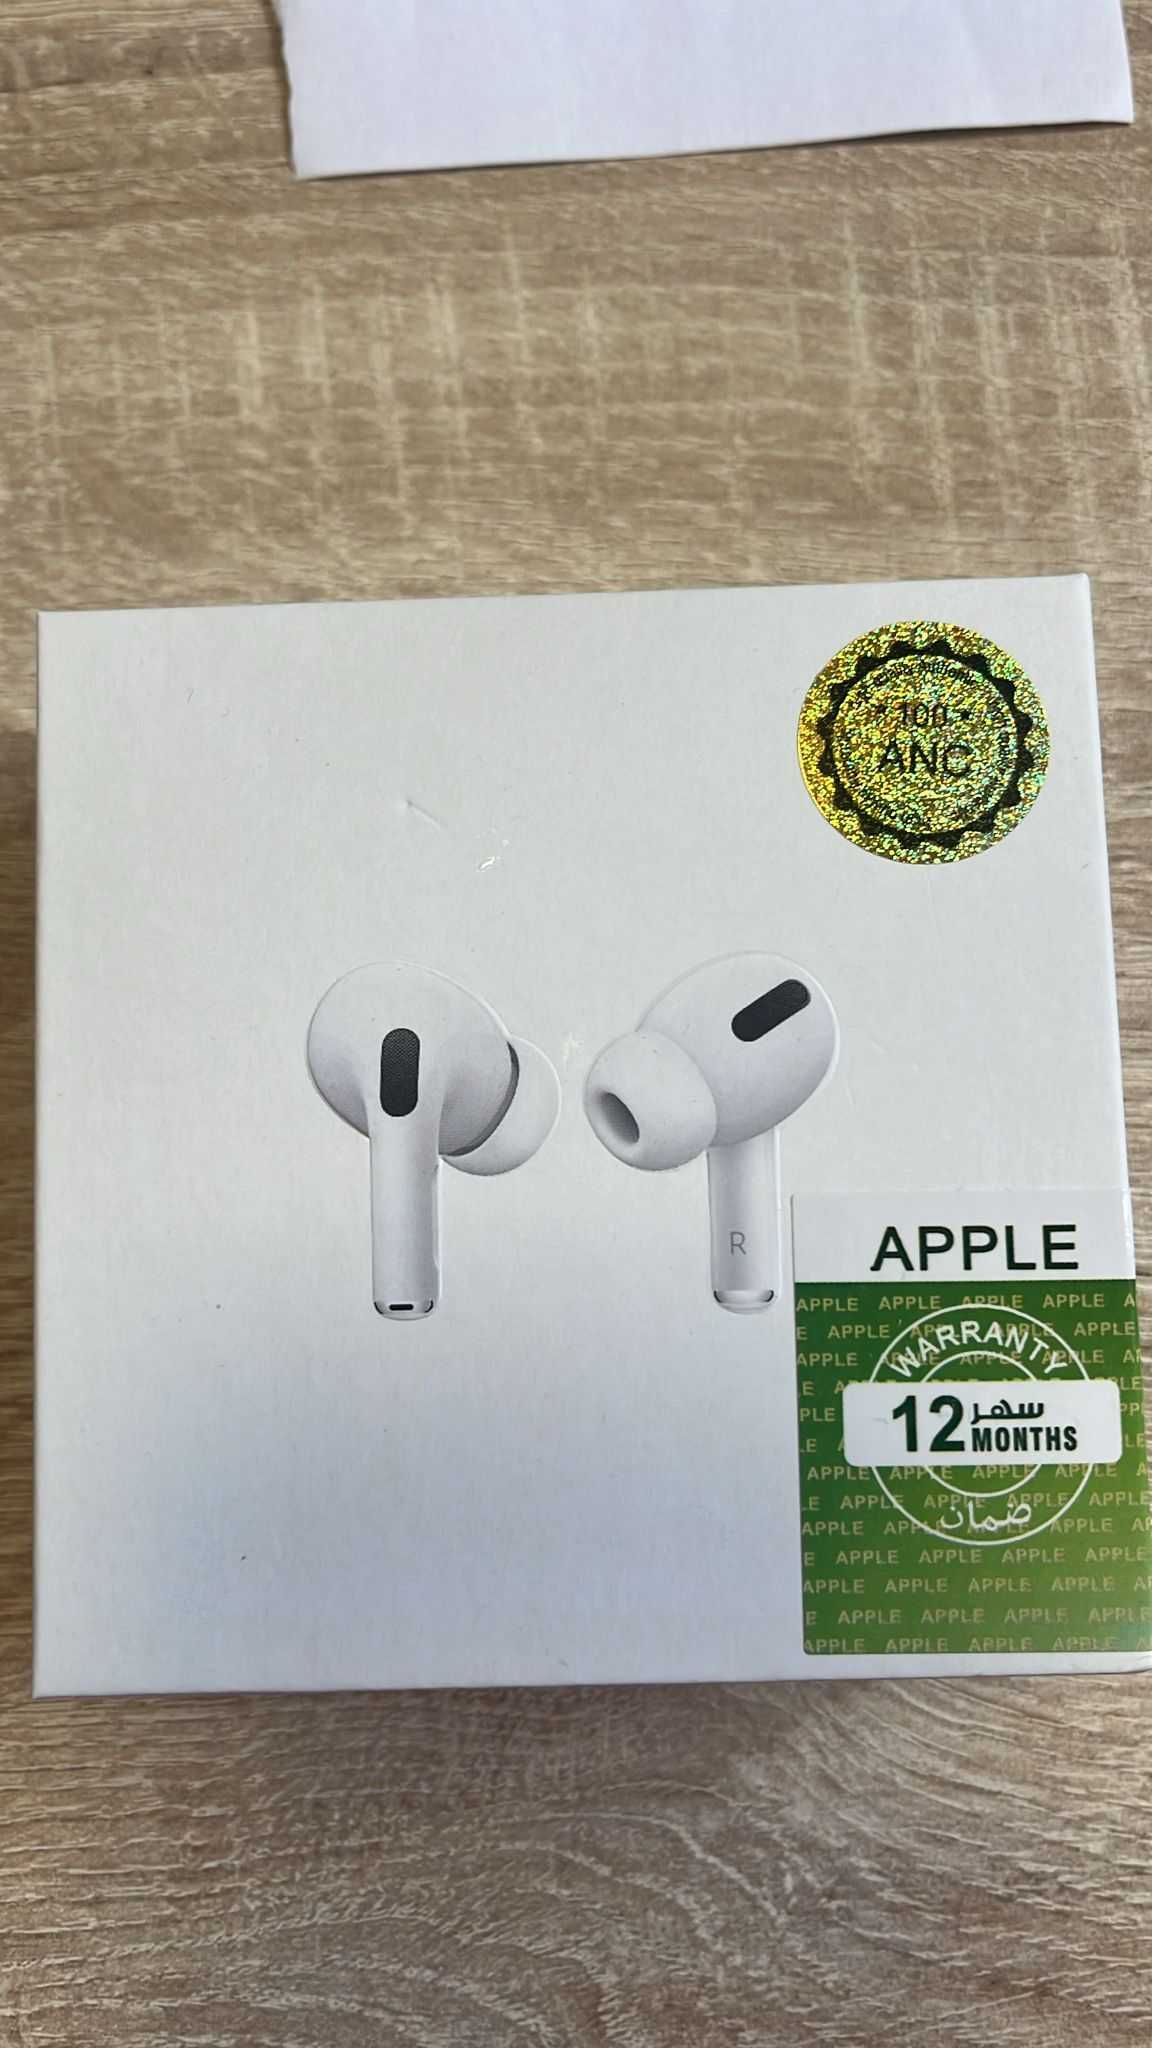 Airpods iphone apple